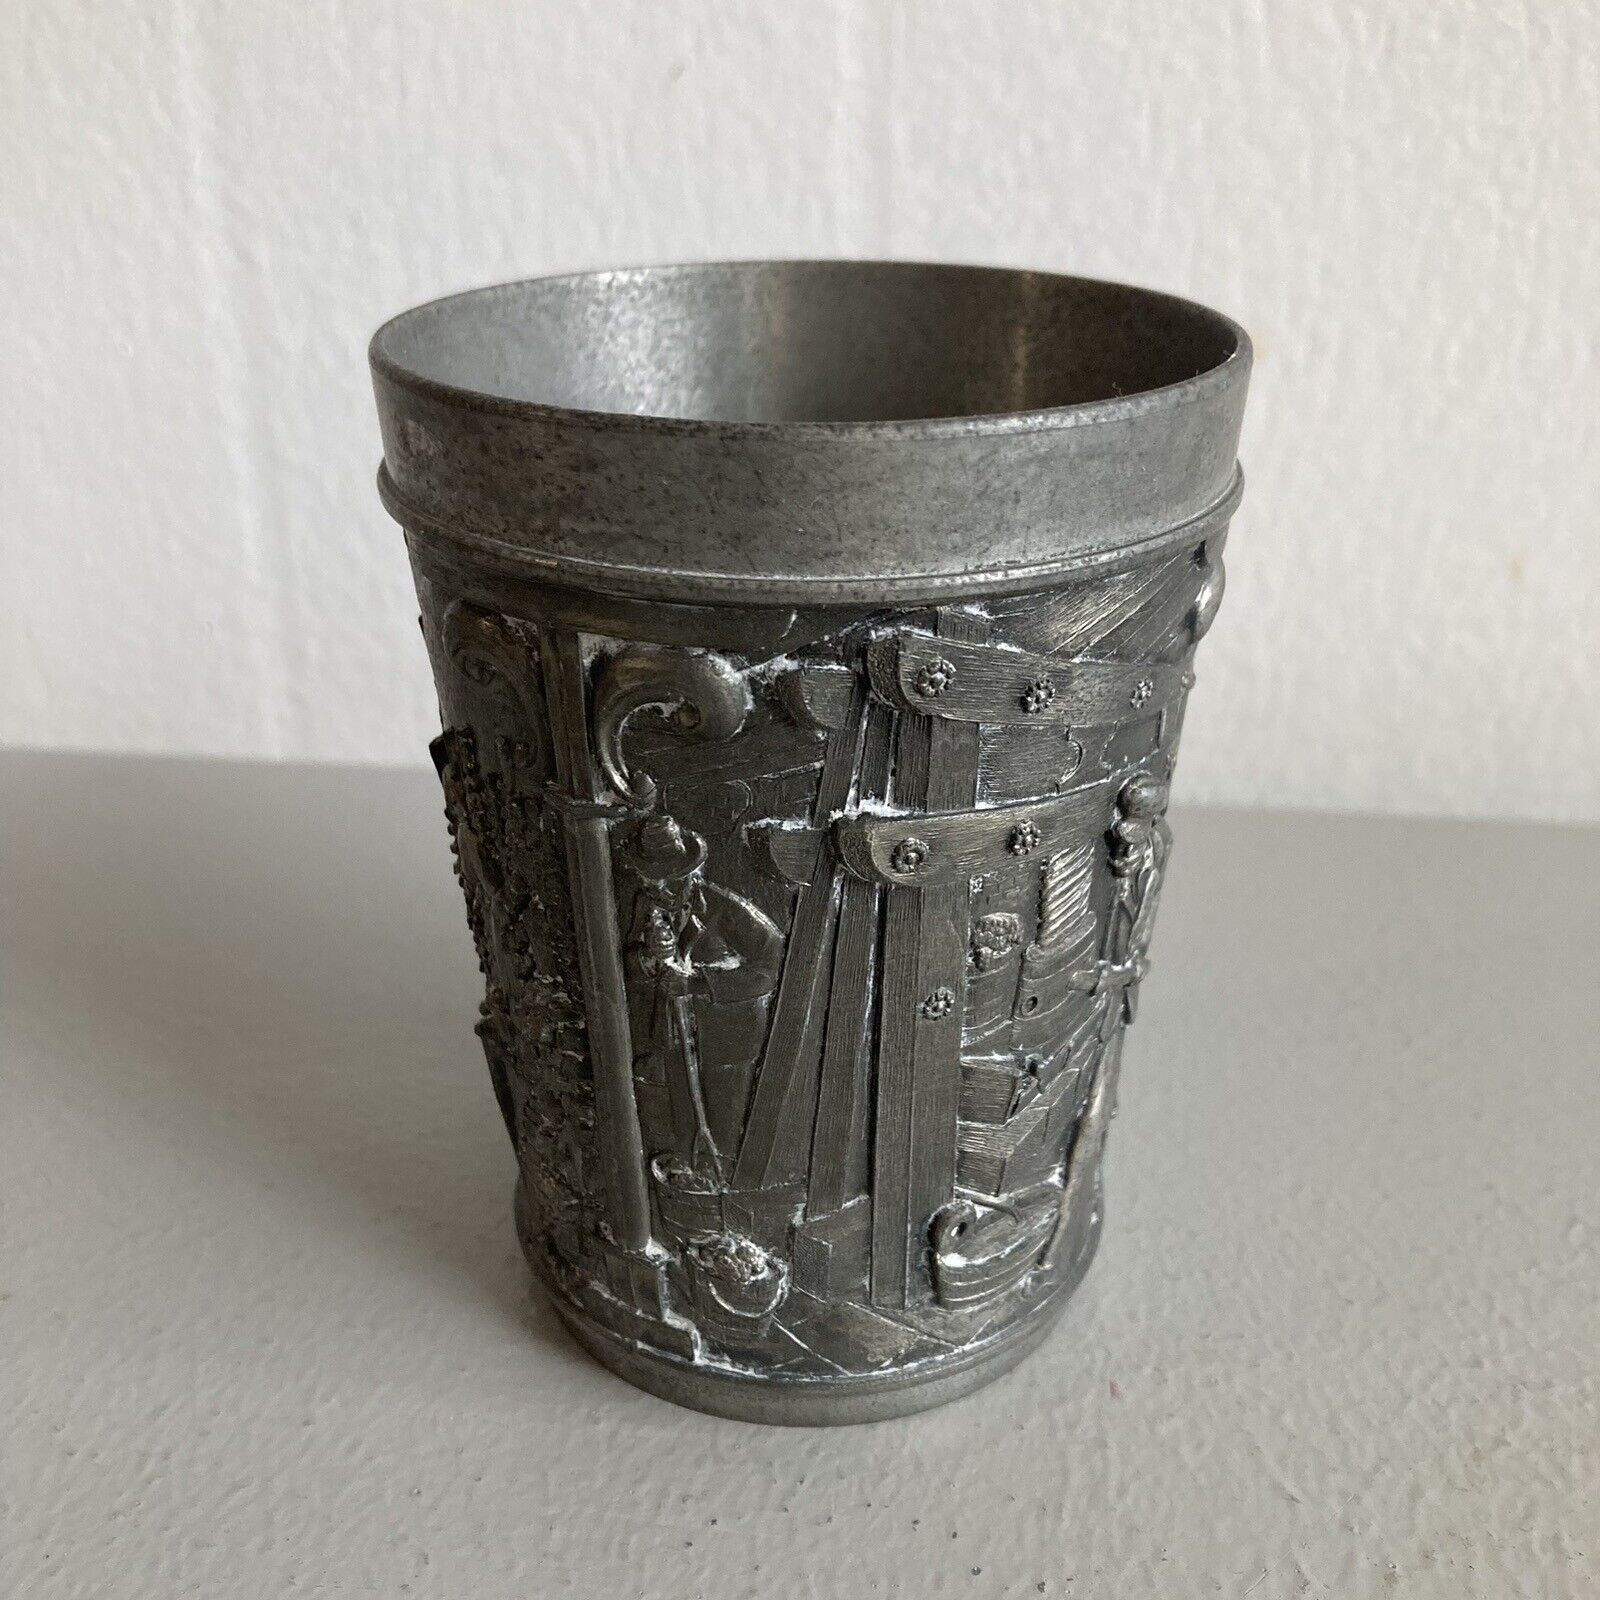 VTG Pewter German Cup Relief Scene Story Panels Ornate Heavy Made in Germany